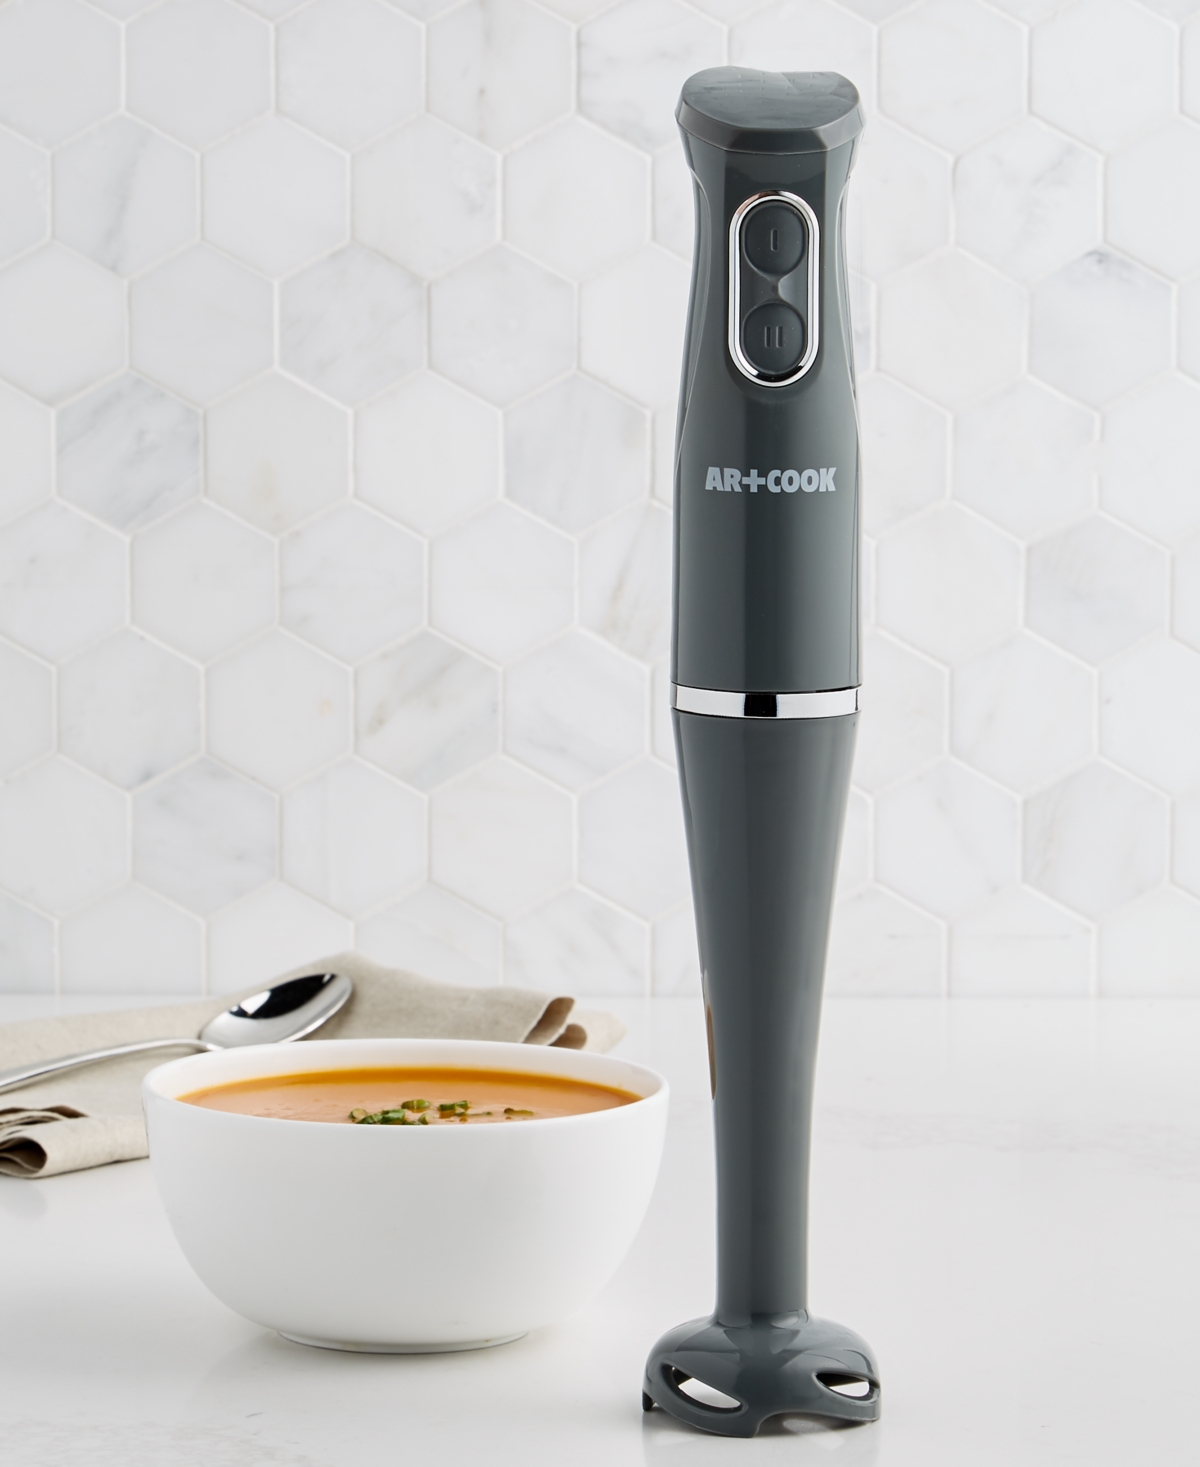 2-Speed Art & Cook Stainless Steel Immersion Blender (Grey) $10.79 + Free Store Pickup at Macy's or Free Shipping on $25+